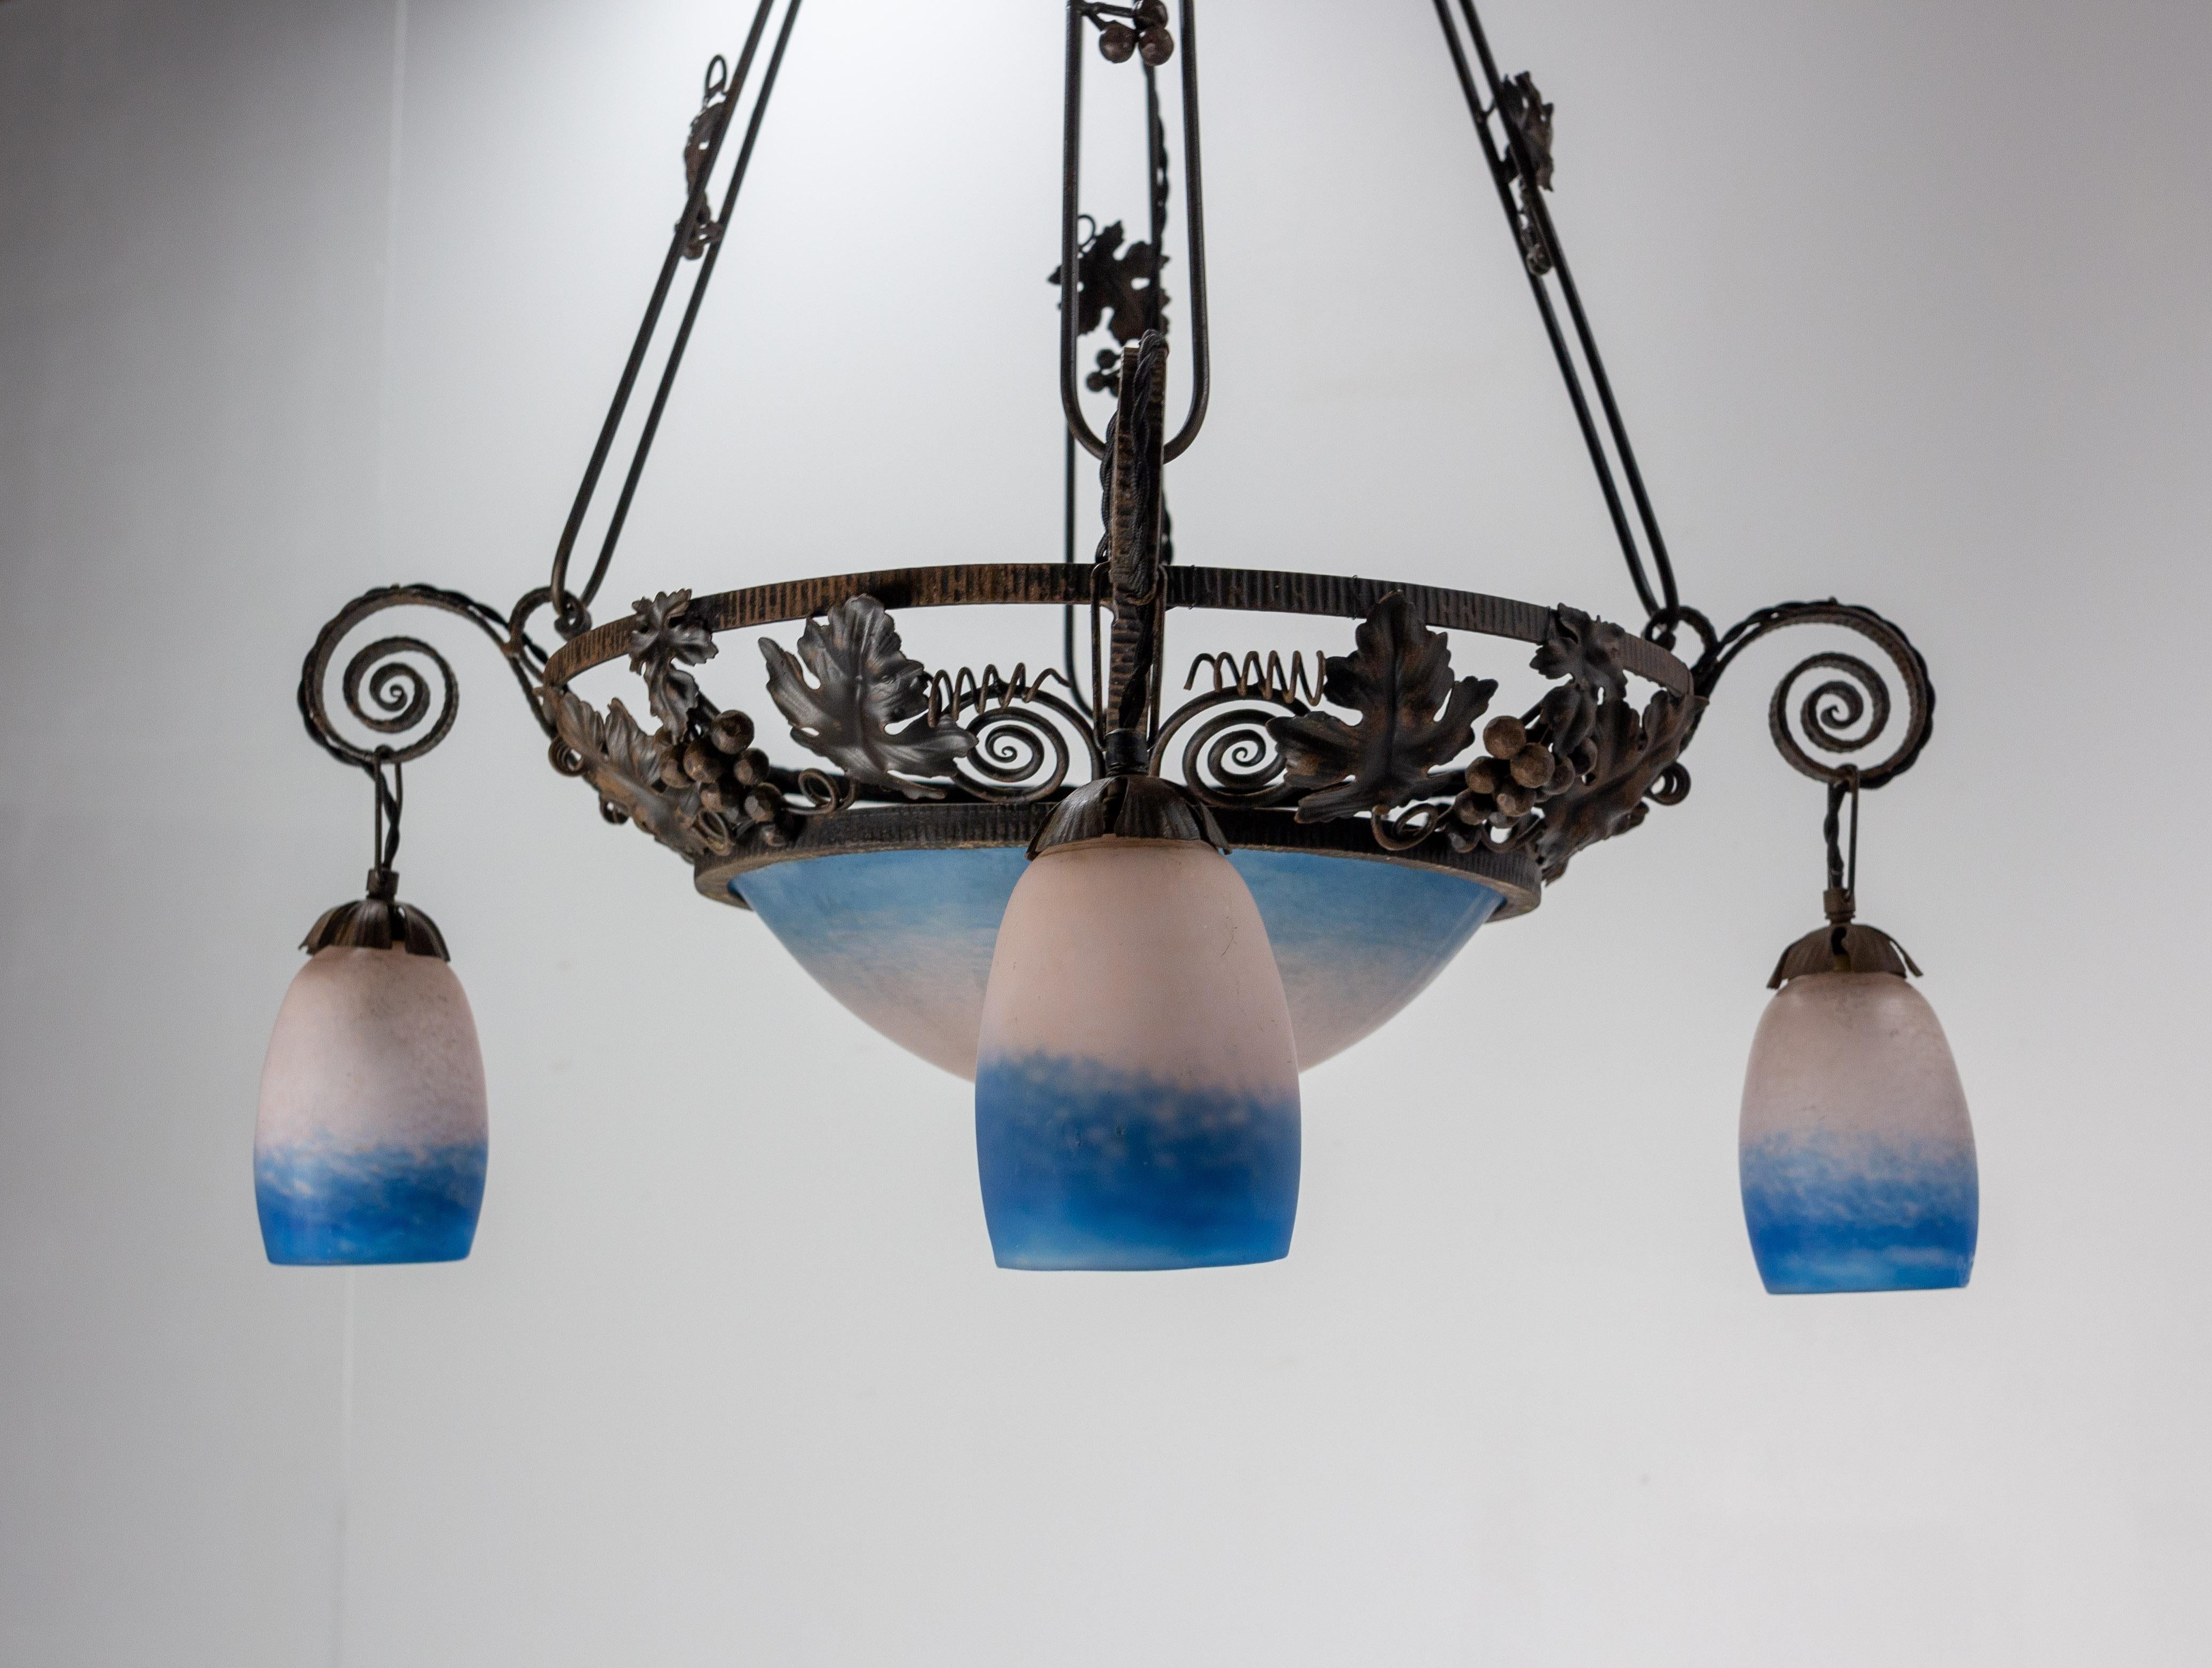 French Art Deco Chandelier Colored Glass & Wrought Iron Ceiling Pendant, C 1930 For Sale 3